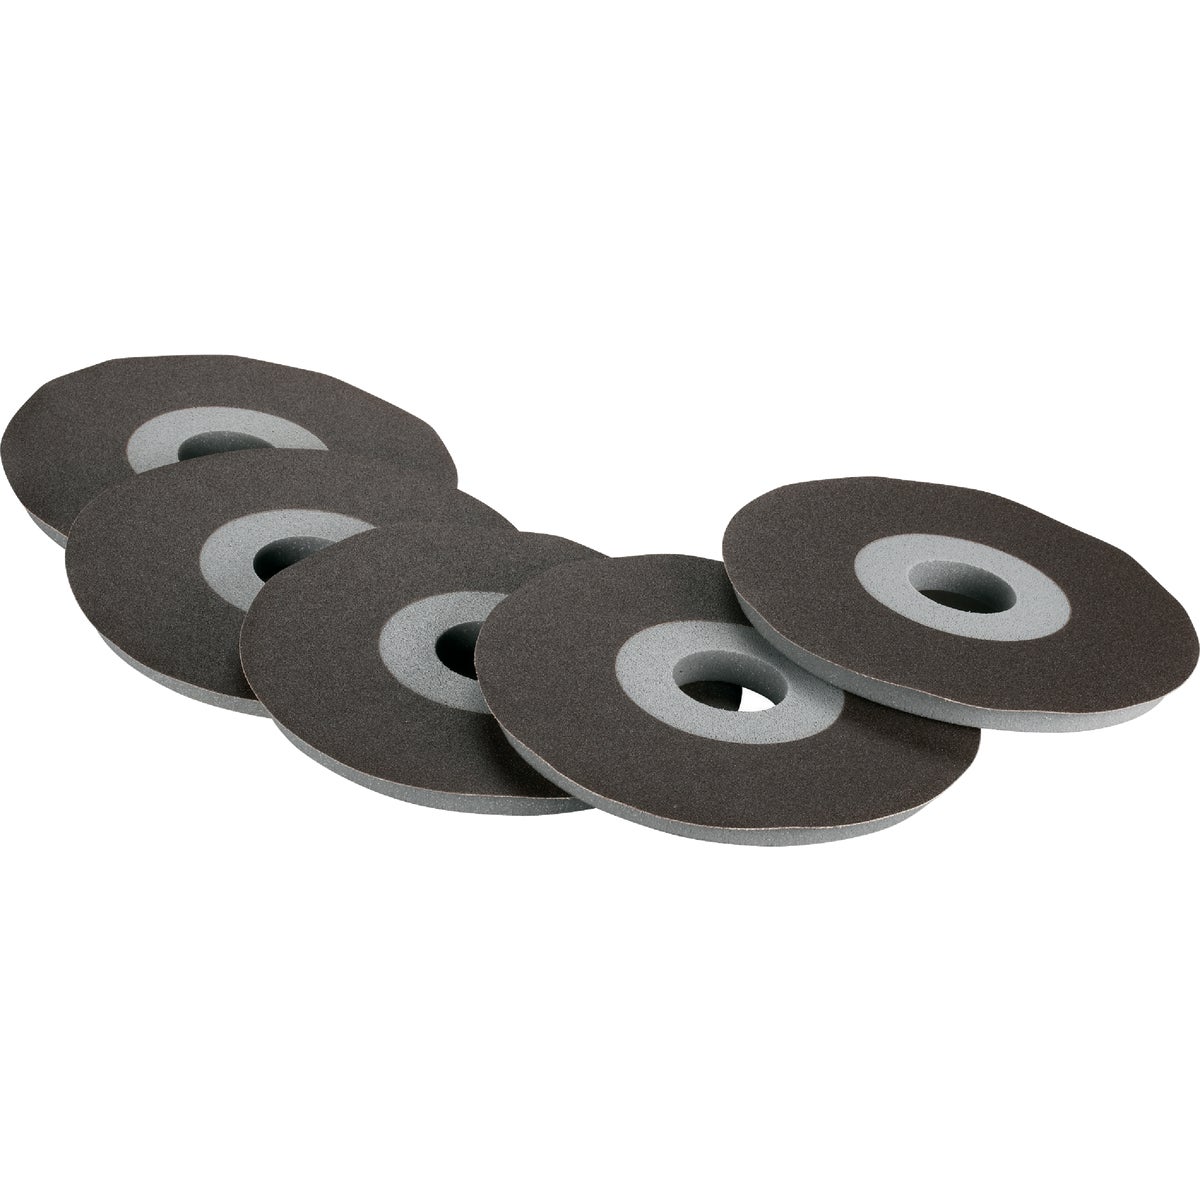 Porter Cable 8- 80 Grit Drywall Sanding Disc (5-Pack)